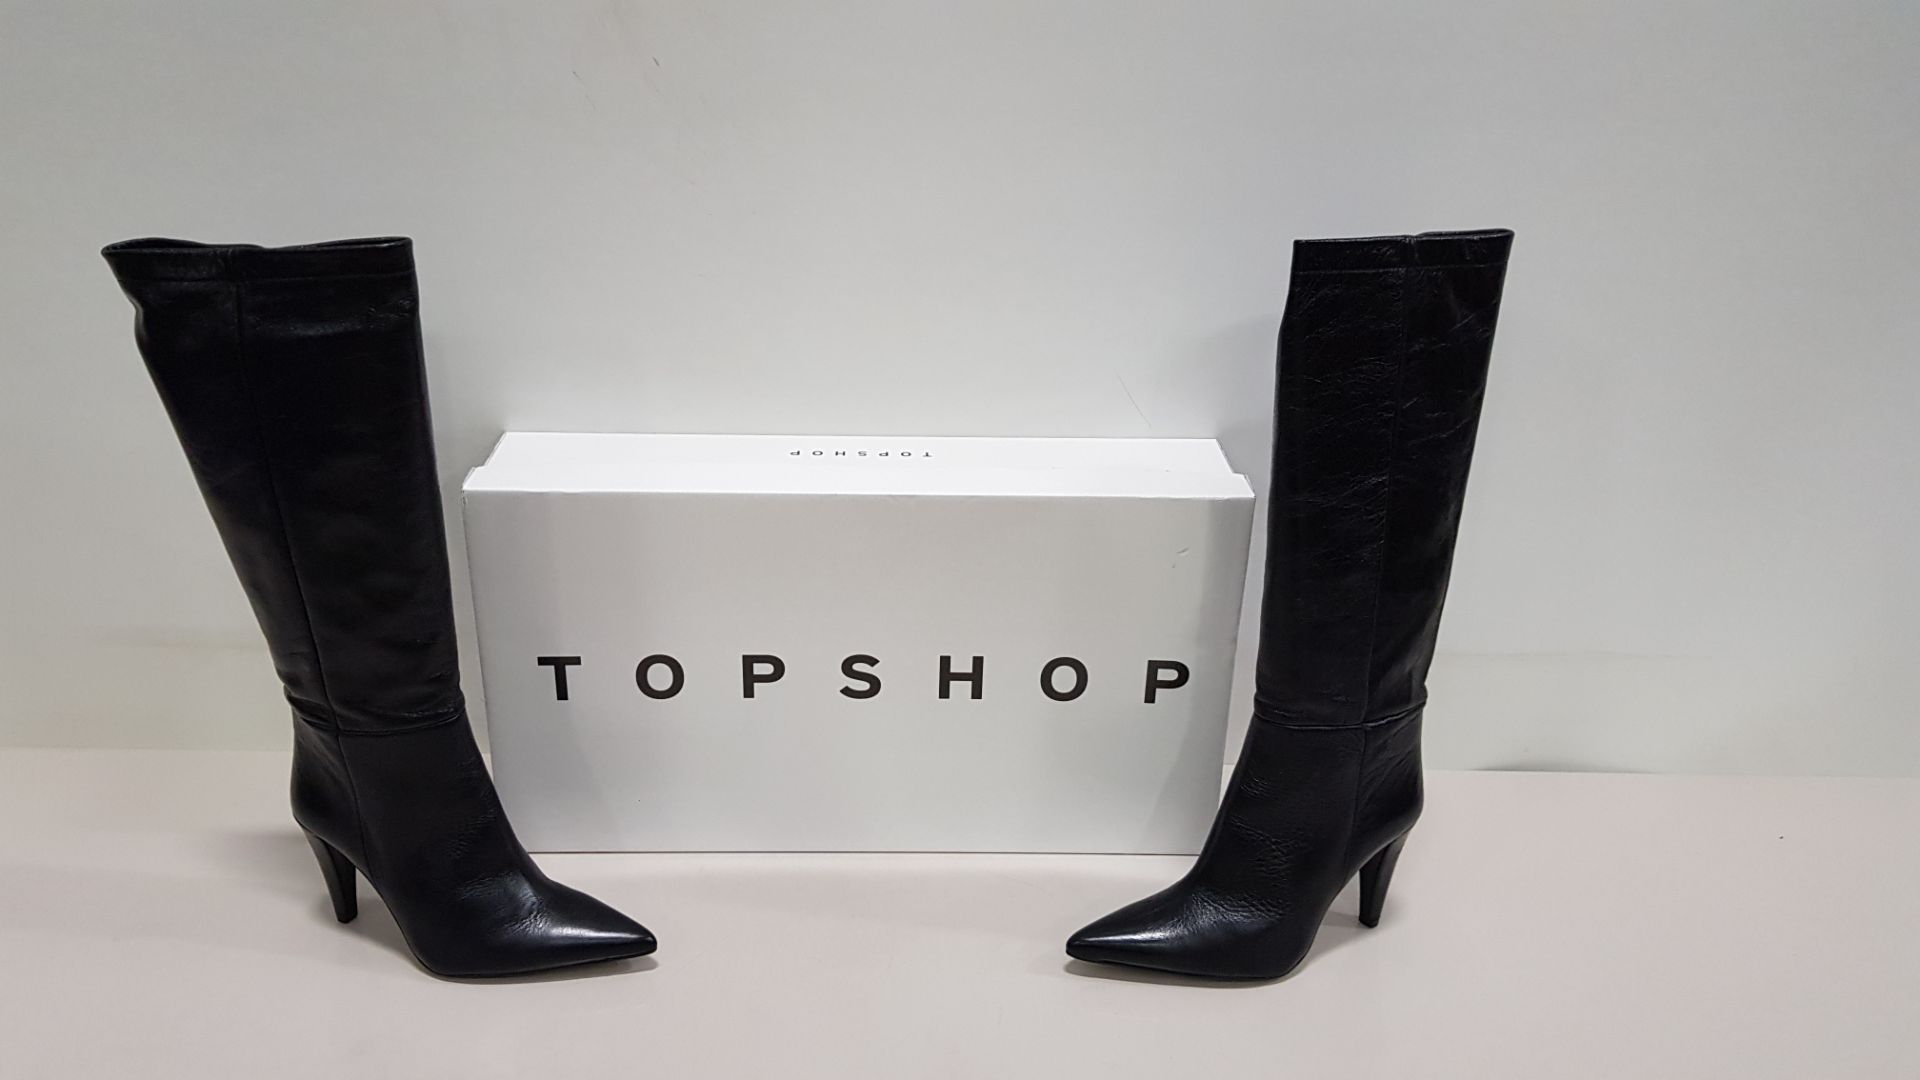 4 X BRAND NEW TOPSHOP TAYLOR BLACK HEELED KNEE HIGH BOOTS UK SIZE 7 RRP Â£120.00